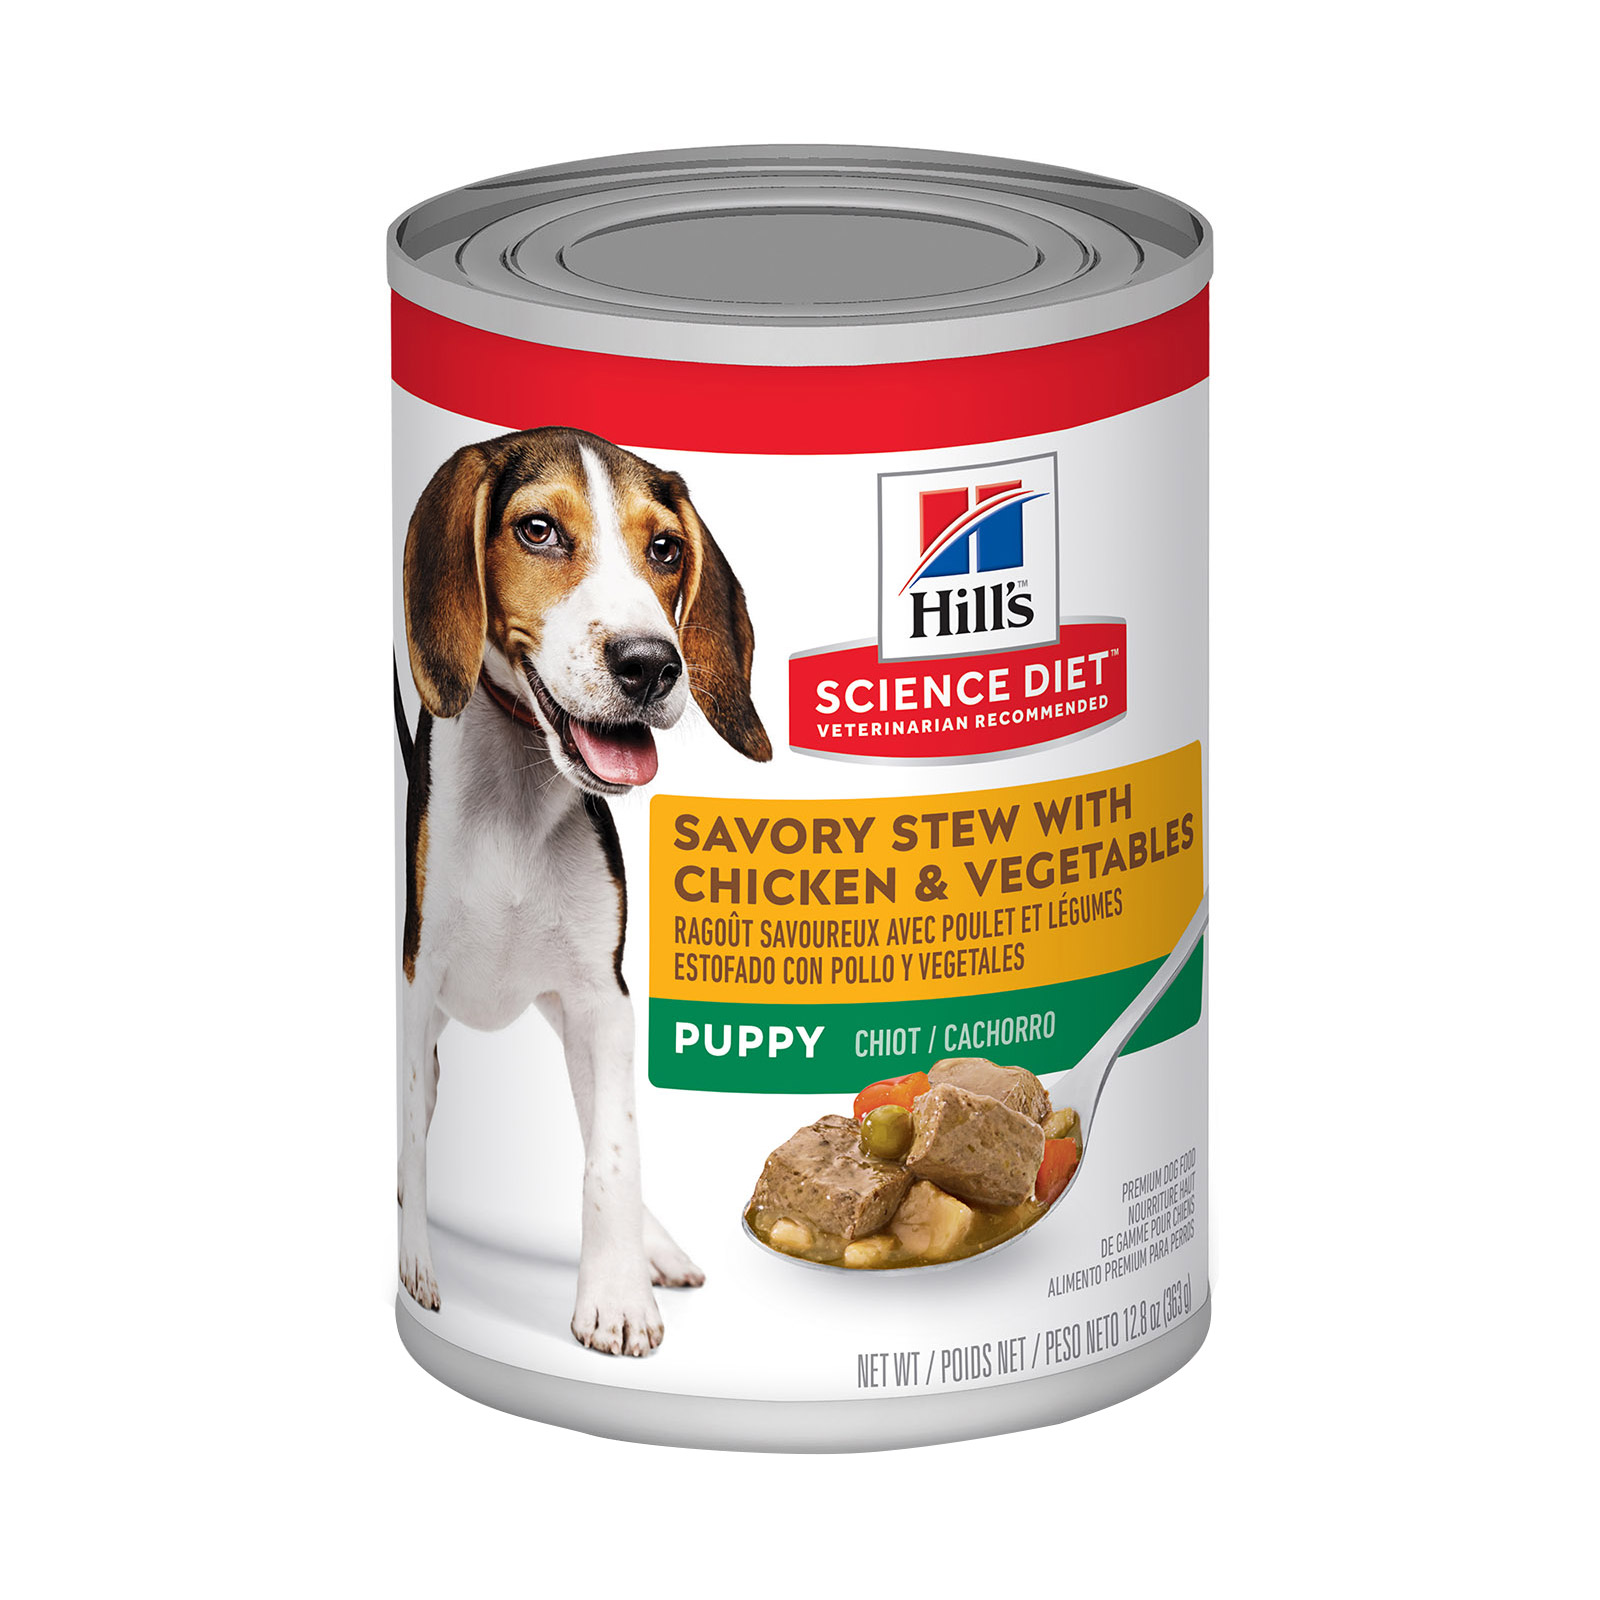 Hill's Science Diet Puppy Savory Stew Chicken & Vegetable Canned Dog Food for Food